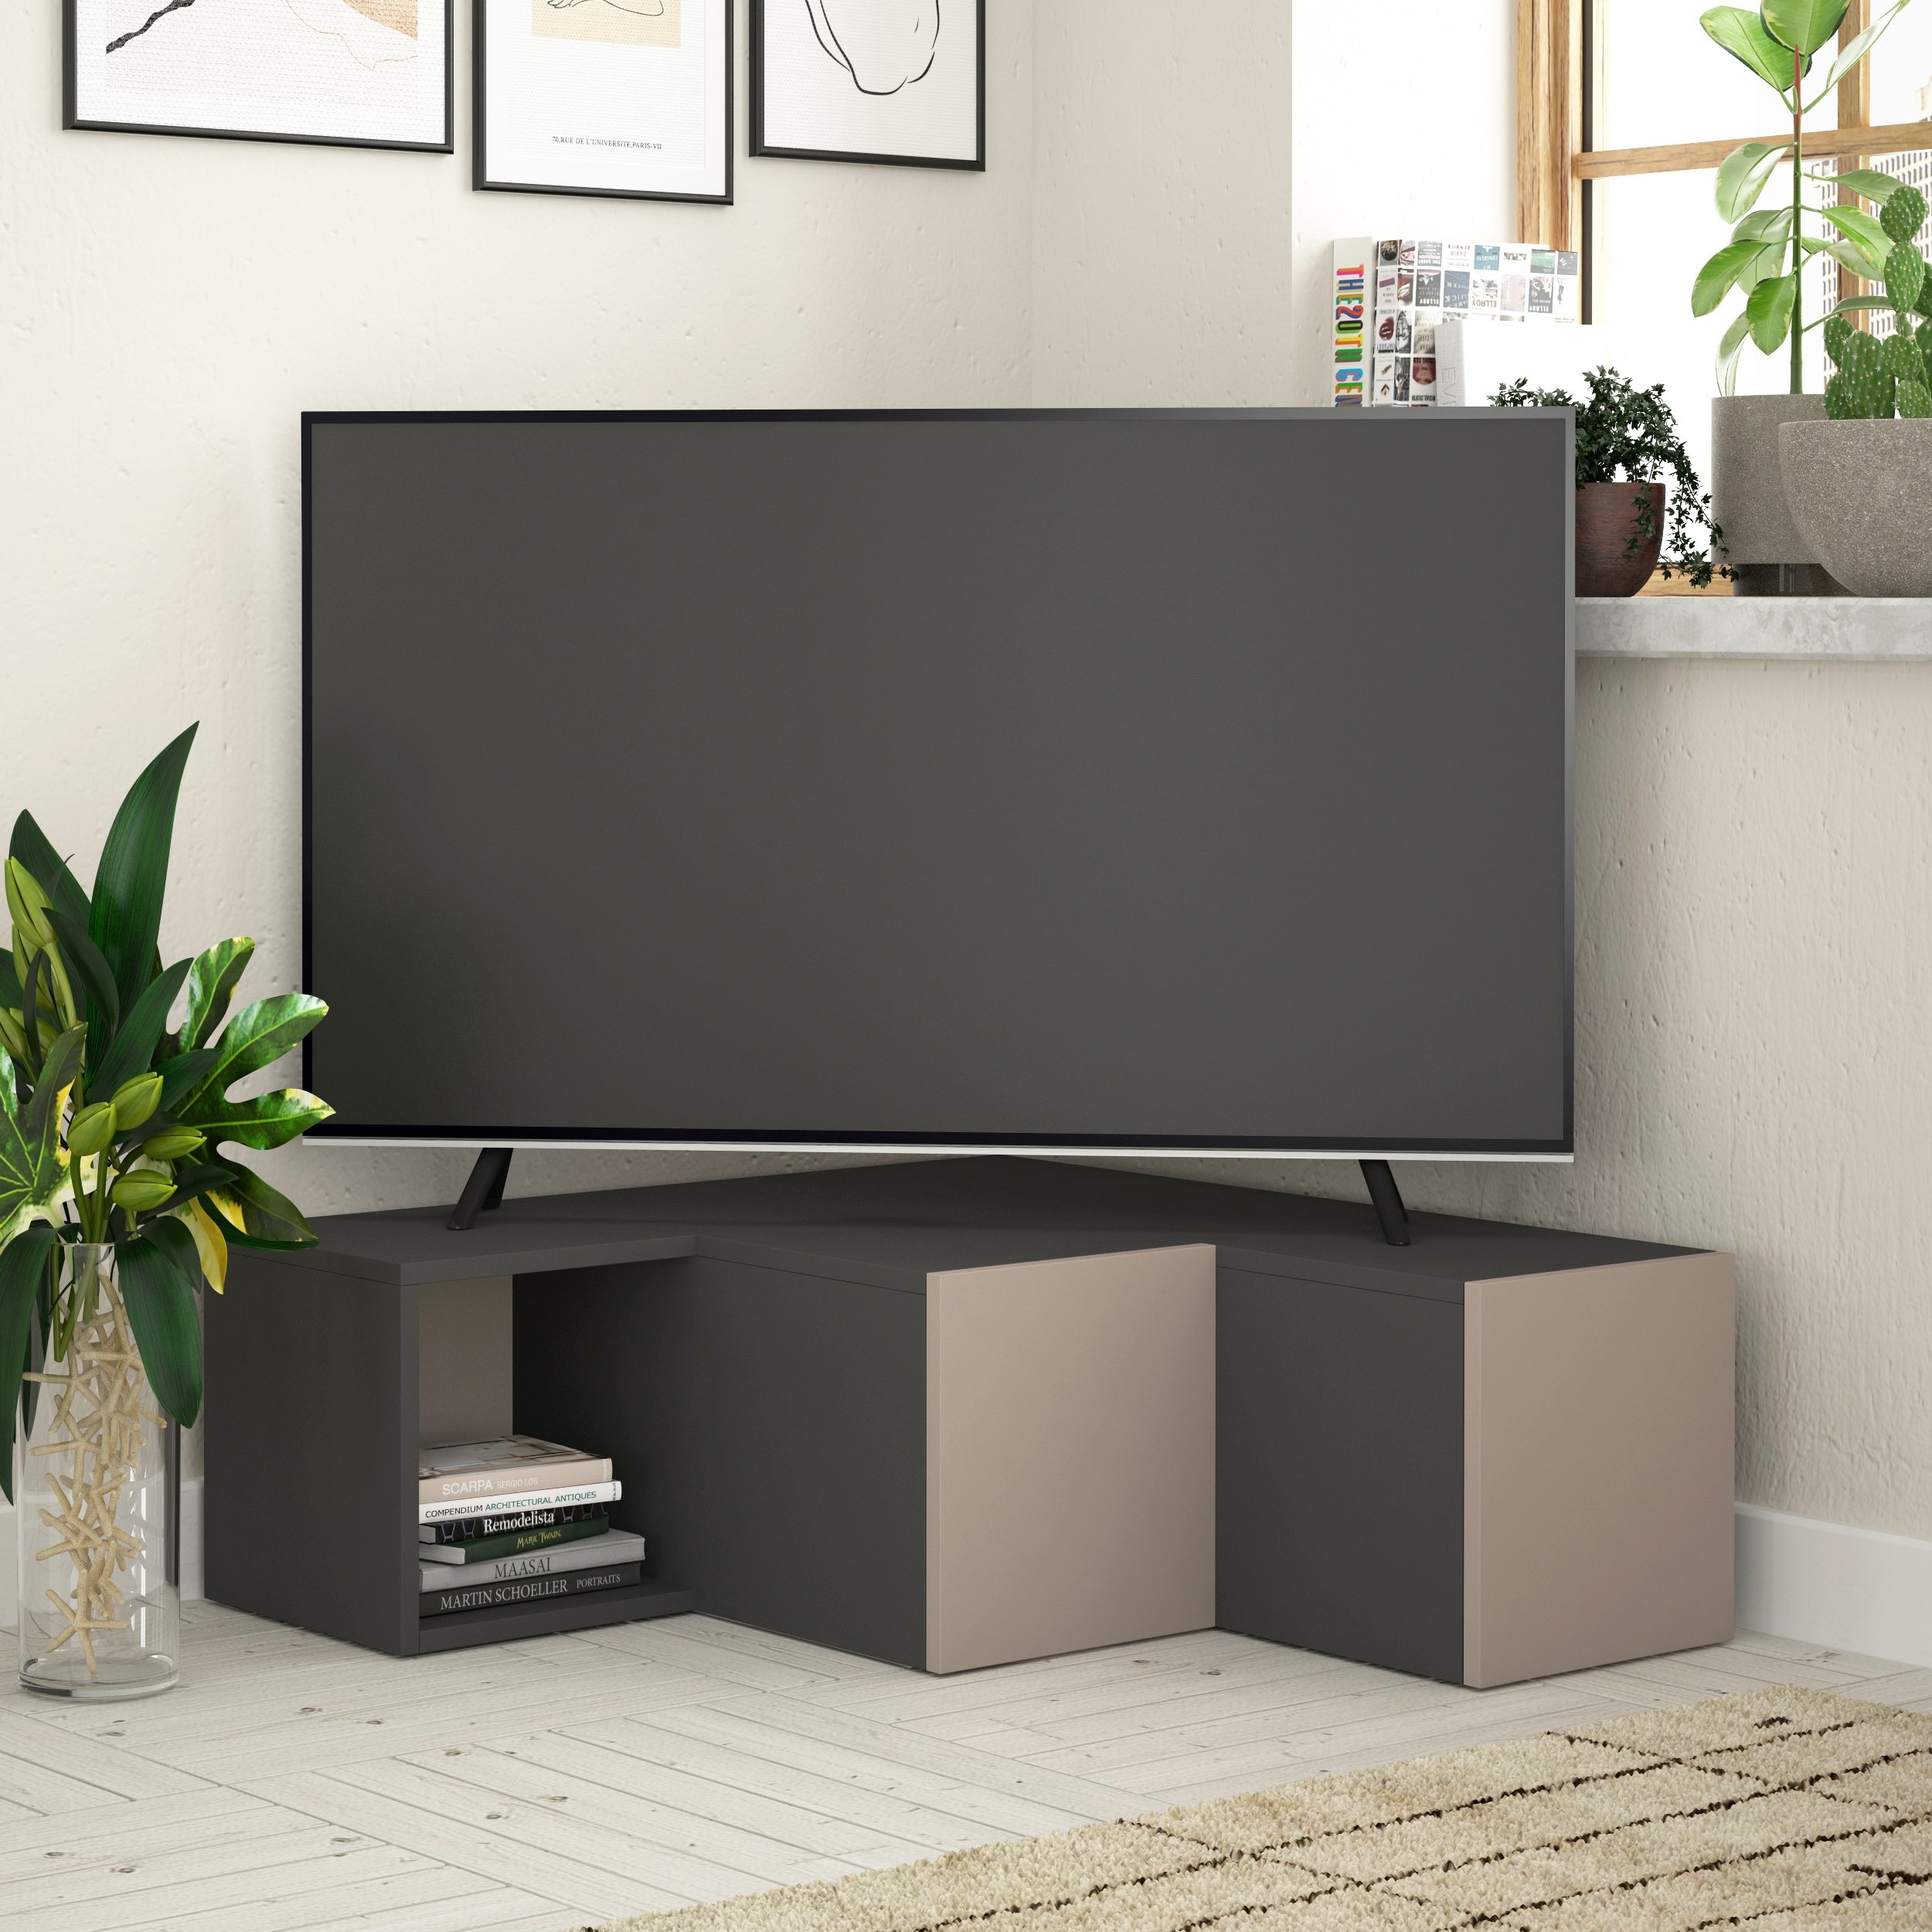 COMPACT TV STAND - ANTHRACITE - LIGHT MOCHA - M.TV.16544.4